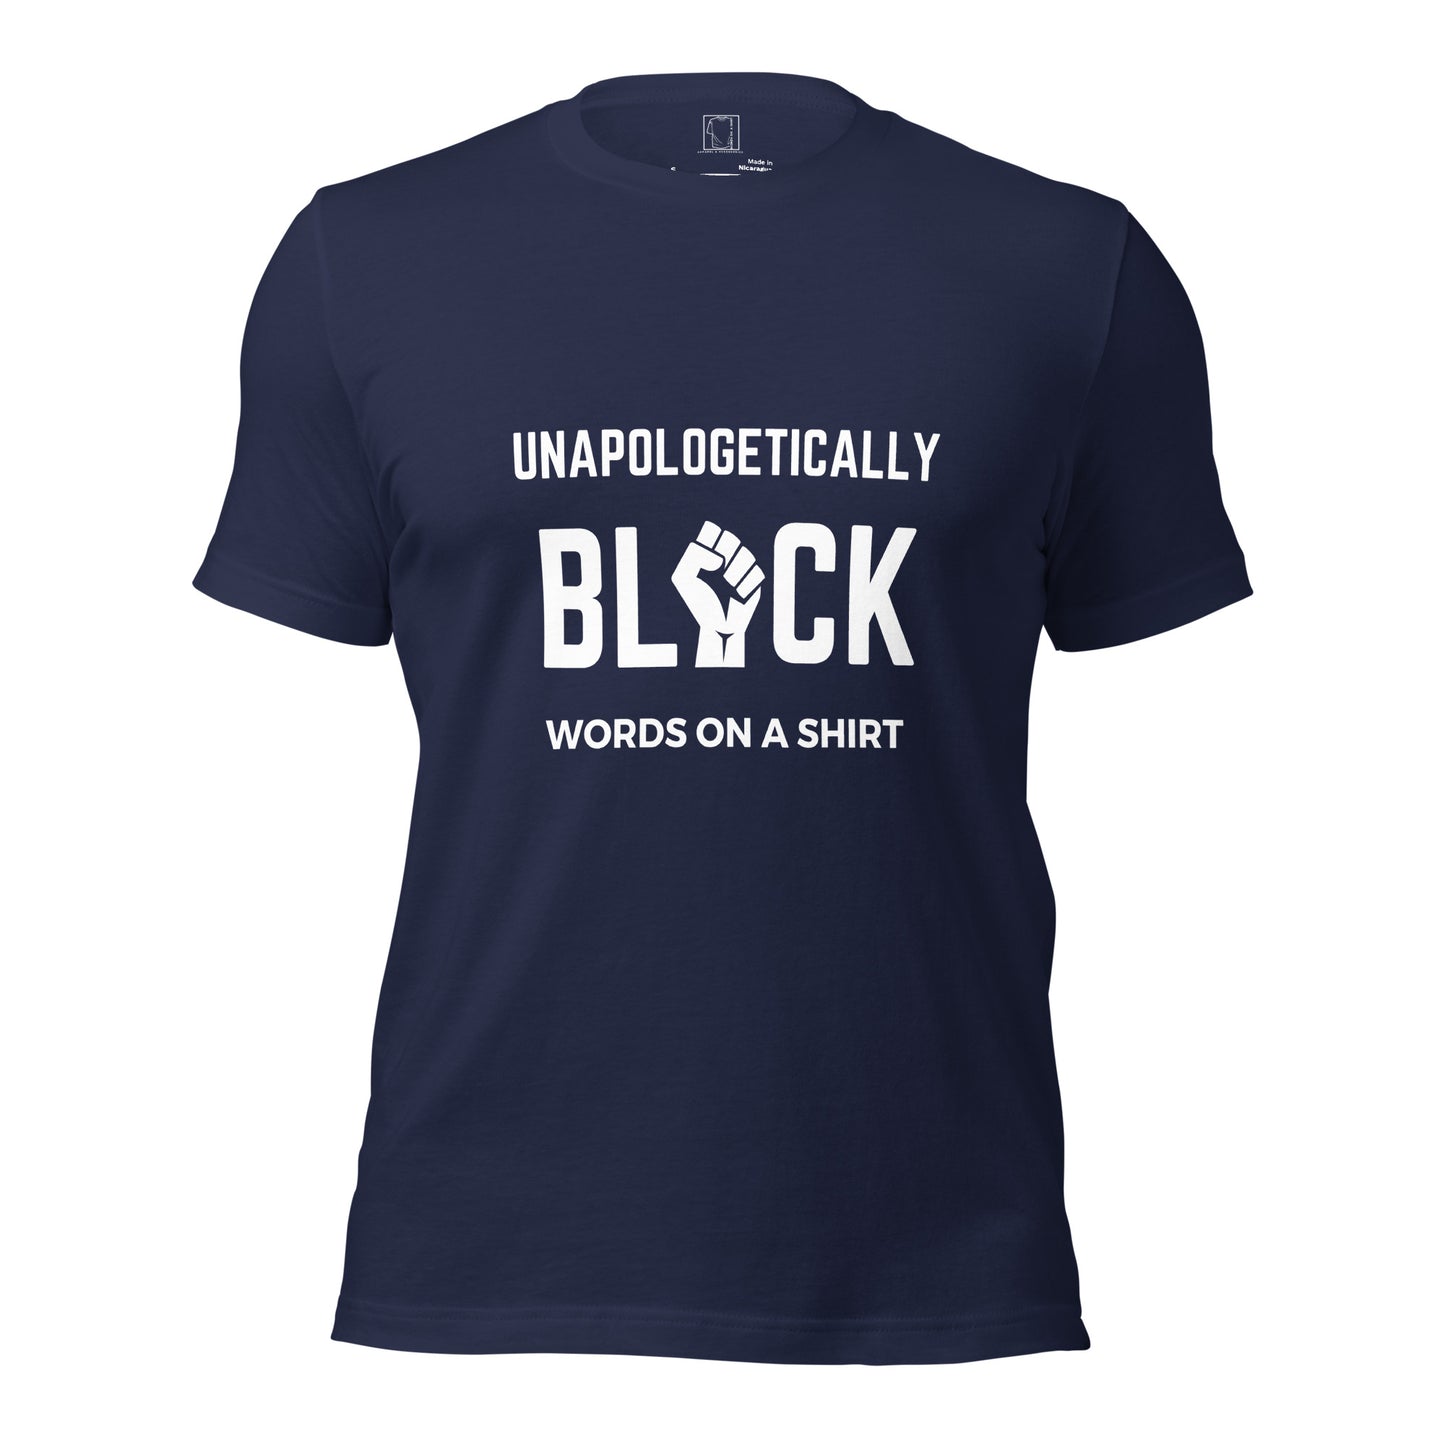 Prepare to be blown away by our unbeatable offer: a 100% cotton tee that will exceed your expectations. Say goodbye to shrinking and hello to impeccable side-seamed construction, all while rocking the best look ever. Get ready, because we are proud to be Unapologetically Black!